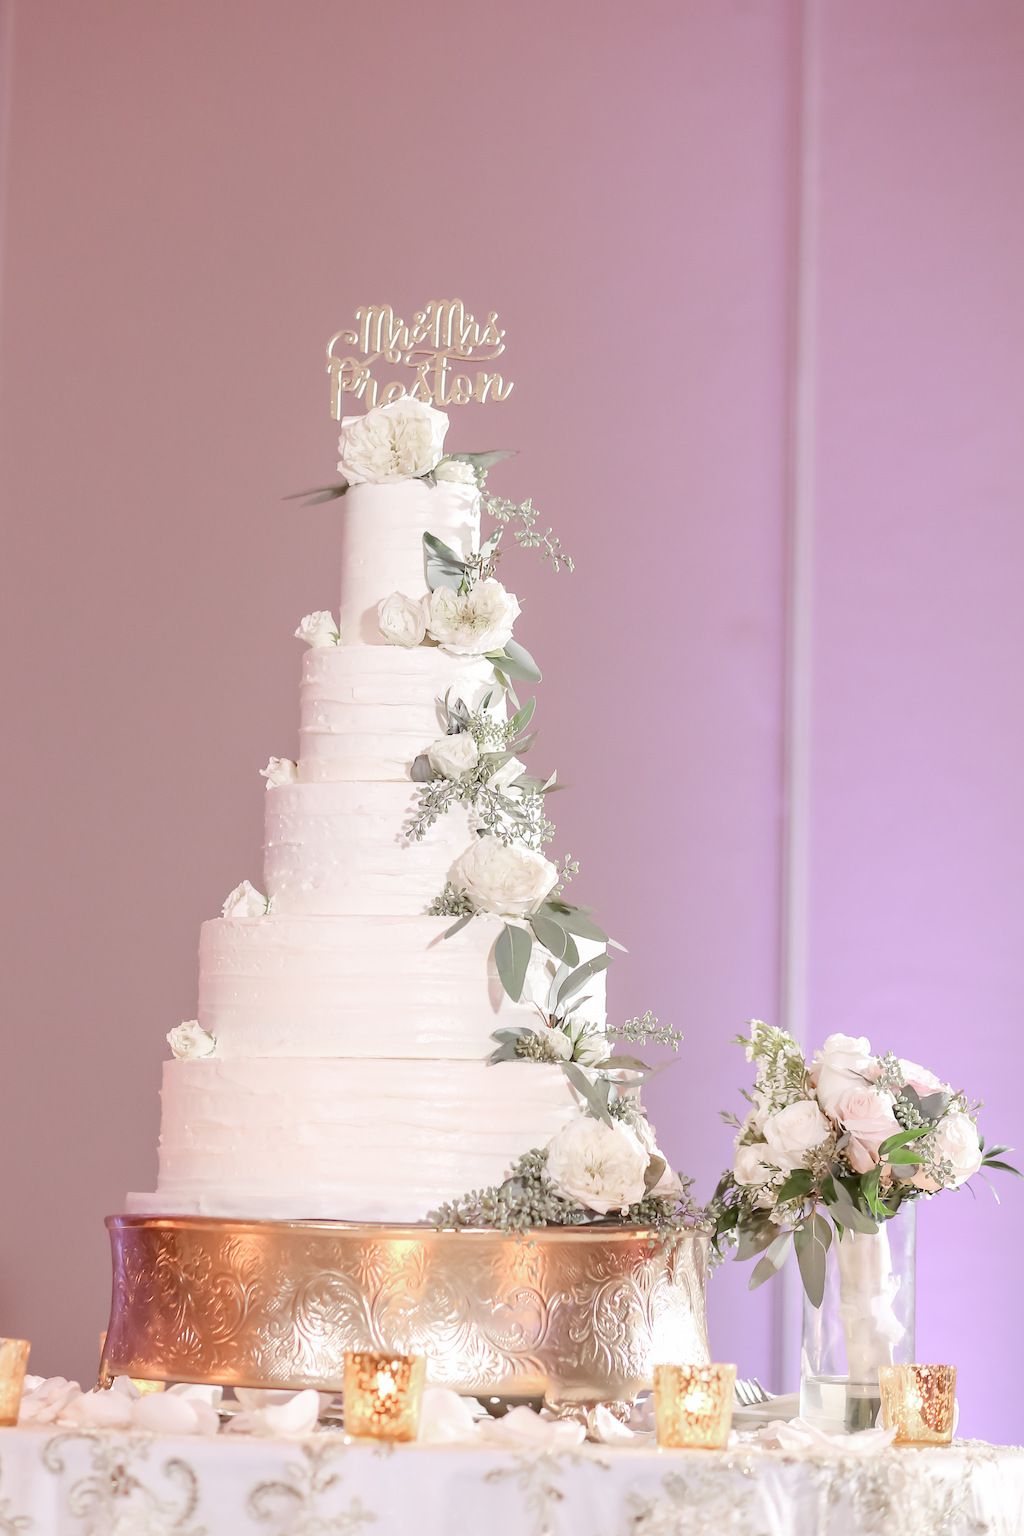 Five Tier White Wedding Cake with Cascading Ivory and Greenery Real Florals and Laser Cut Custom Cake Topper on Gold Cake Stand | Tampa Bay Wedding Photographer Lifelong Photography Studio